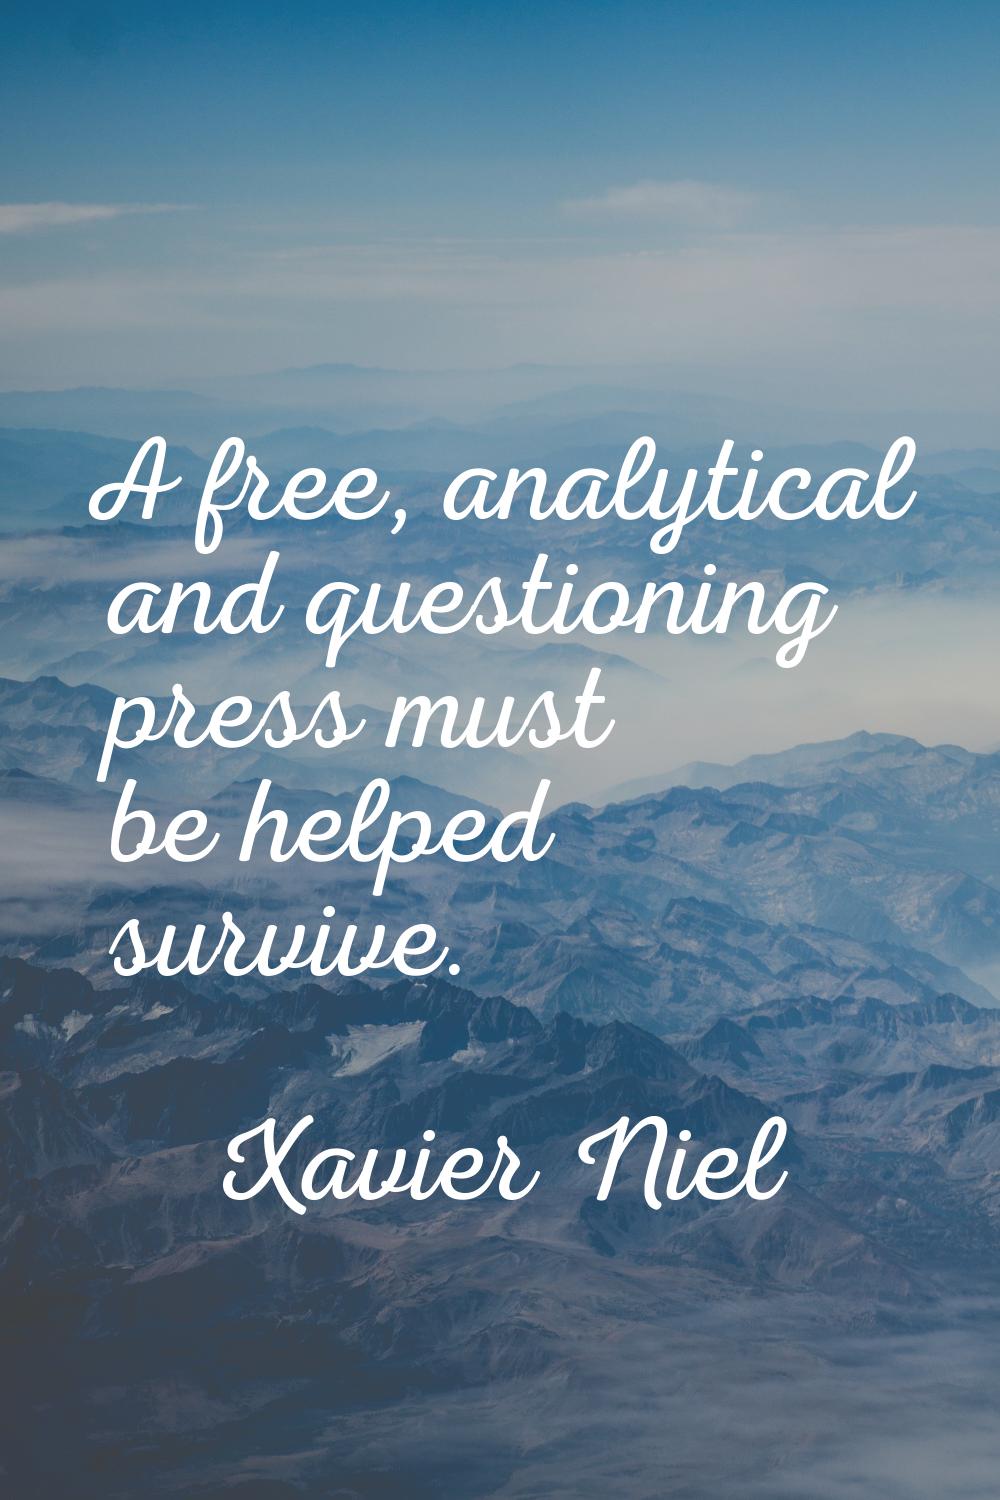 A free, analytical and questioning press must be helped survive.